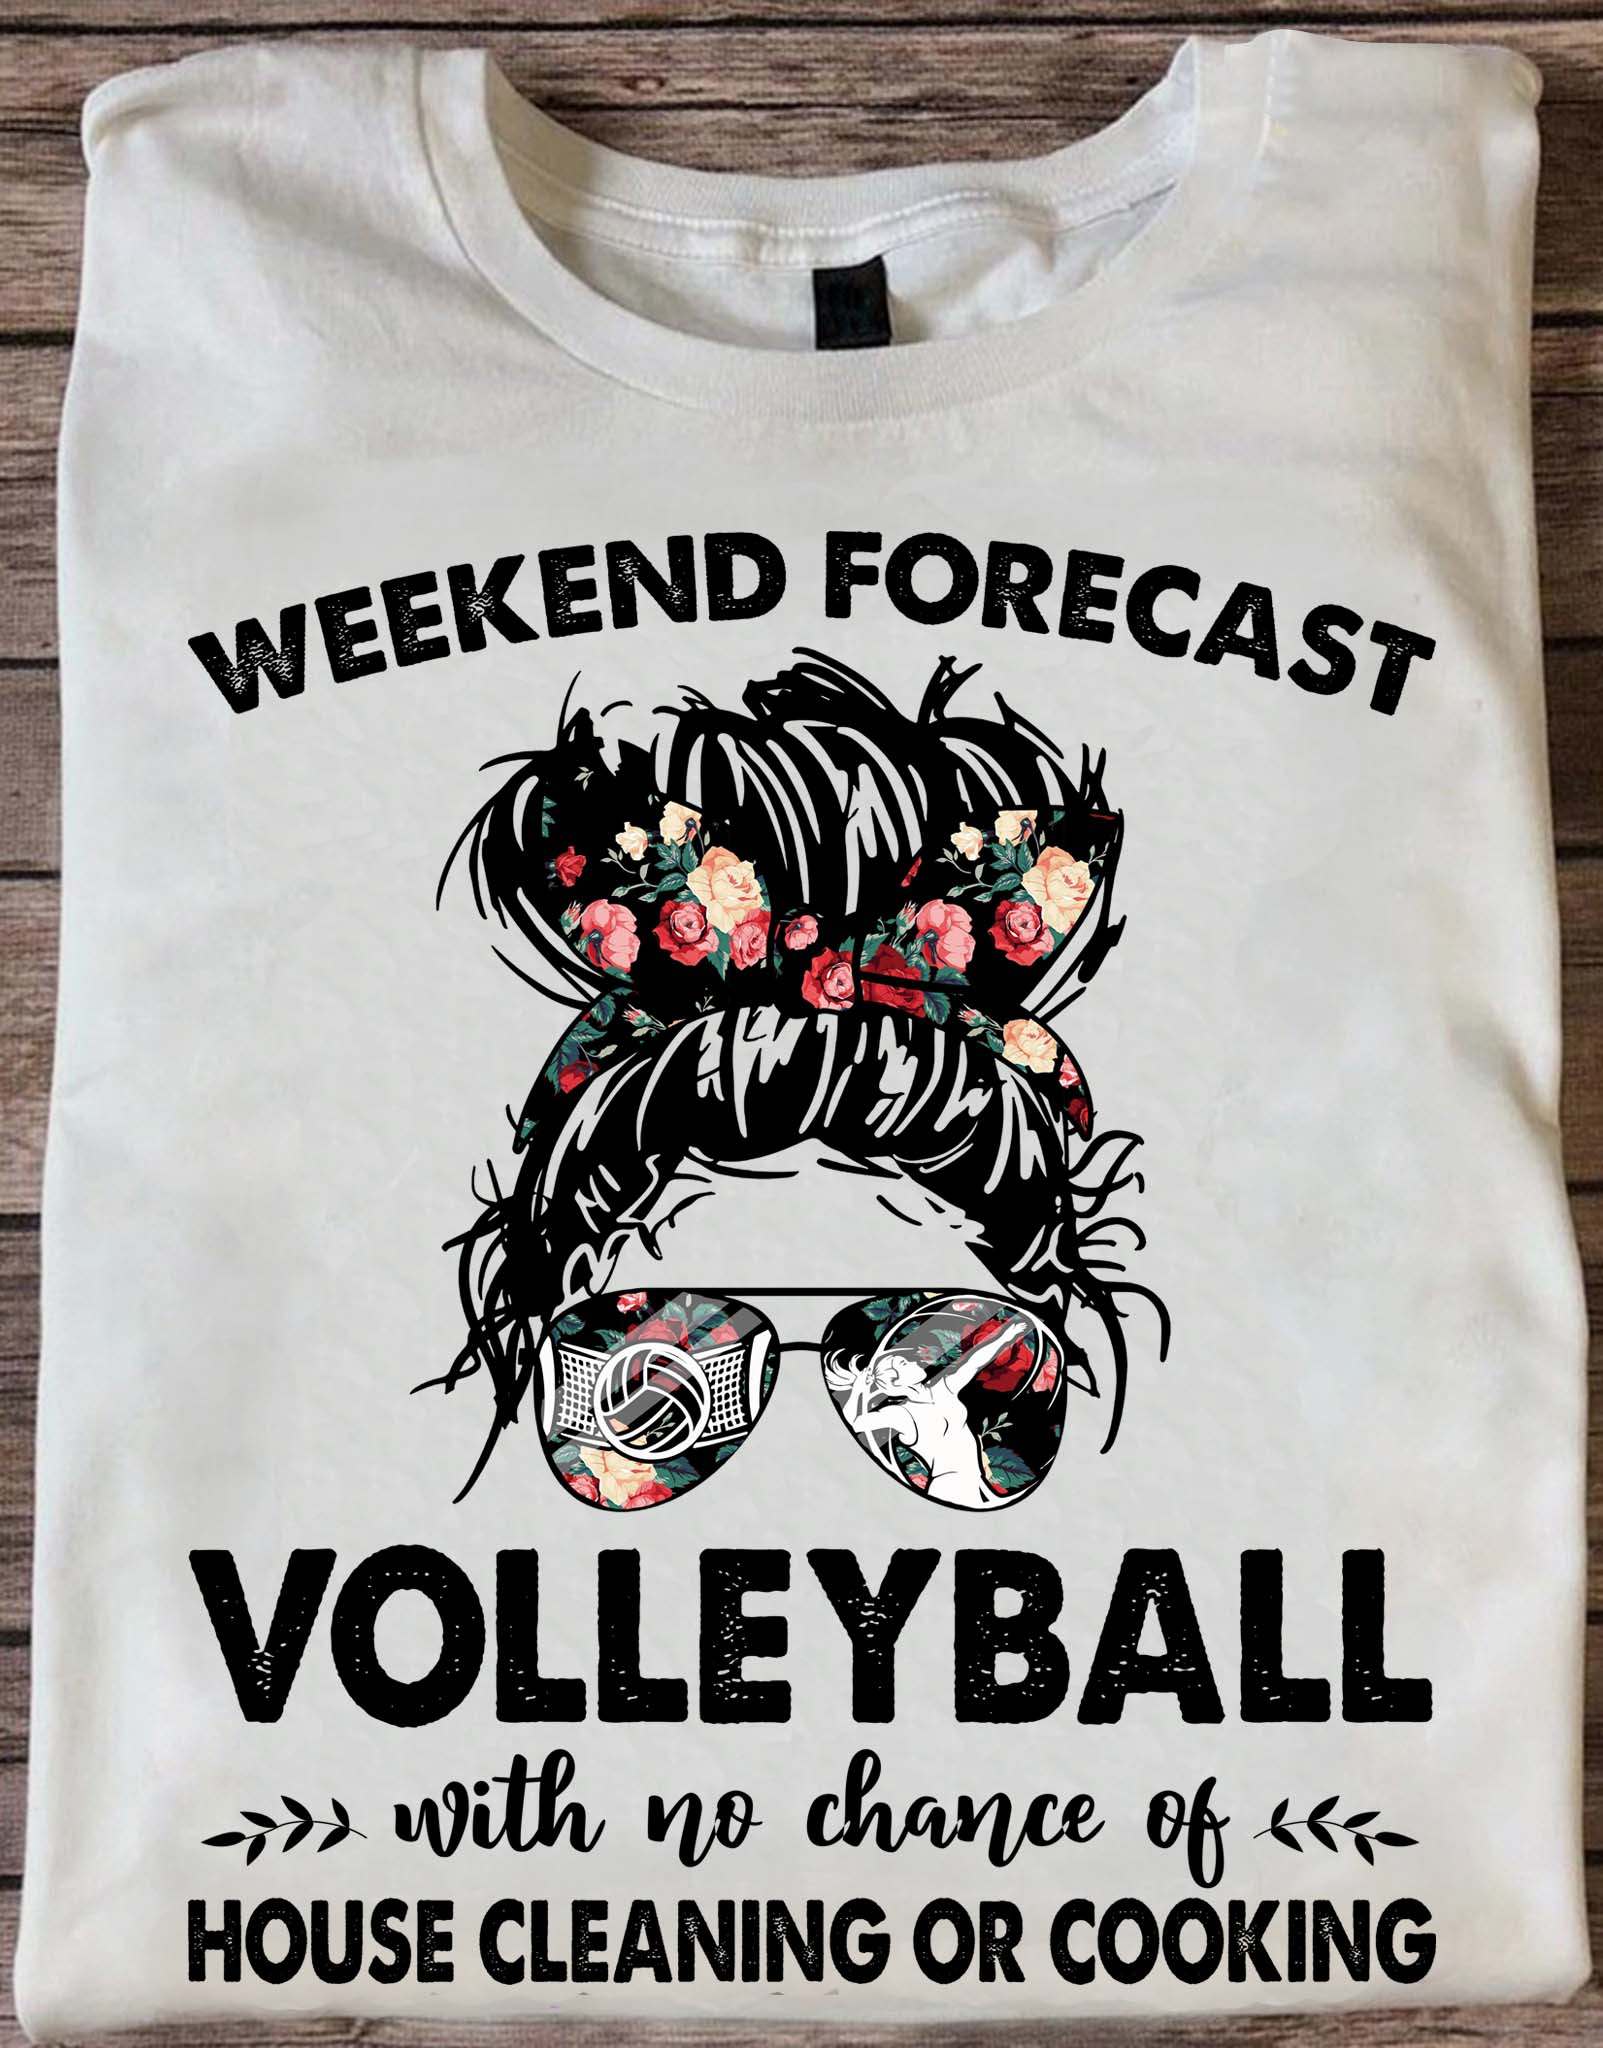 Weekend forecast volleyball with no chance of house cleaning or cooking - Girl love volleyball